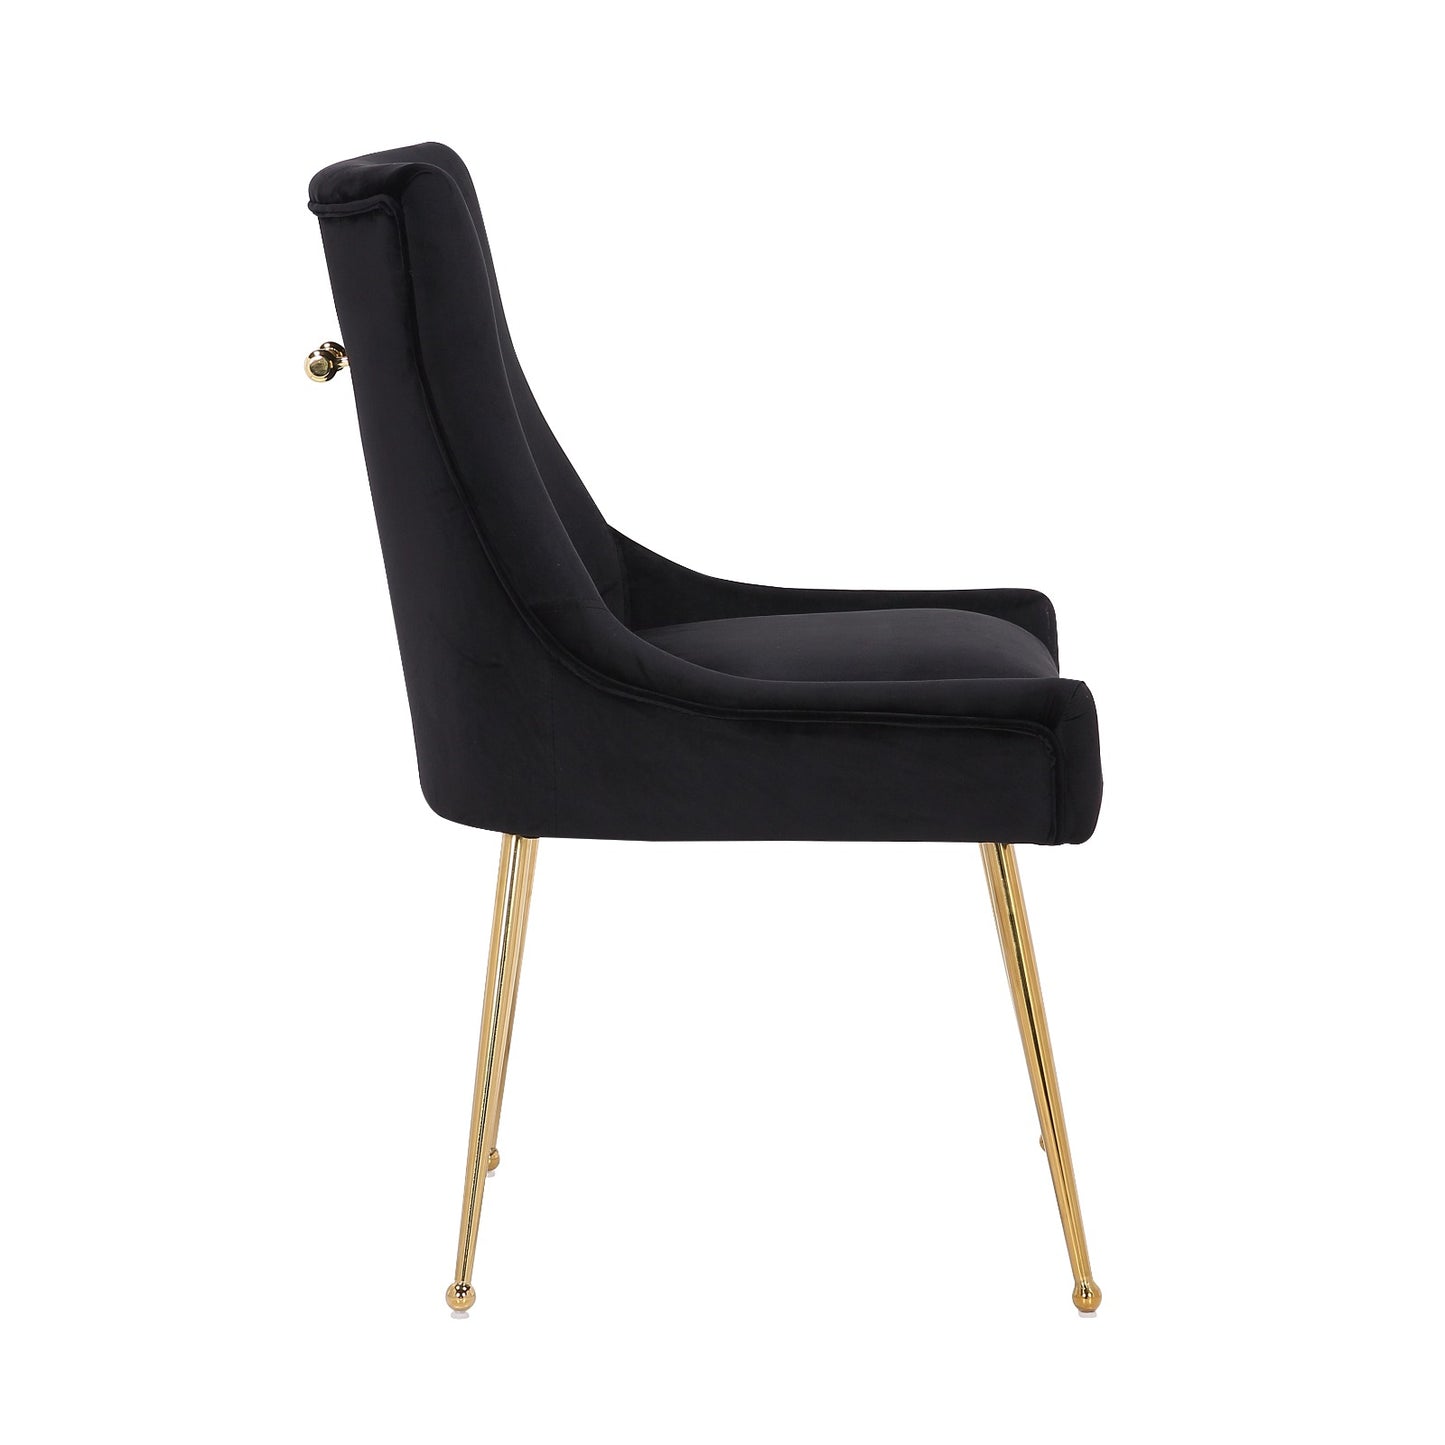 BLACK VELVET ACCENT CHAIRS WITH GOLD HANDLE - PAIR